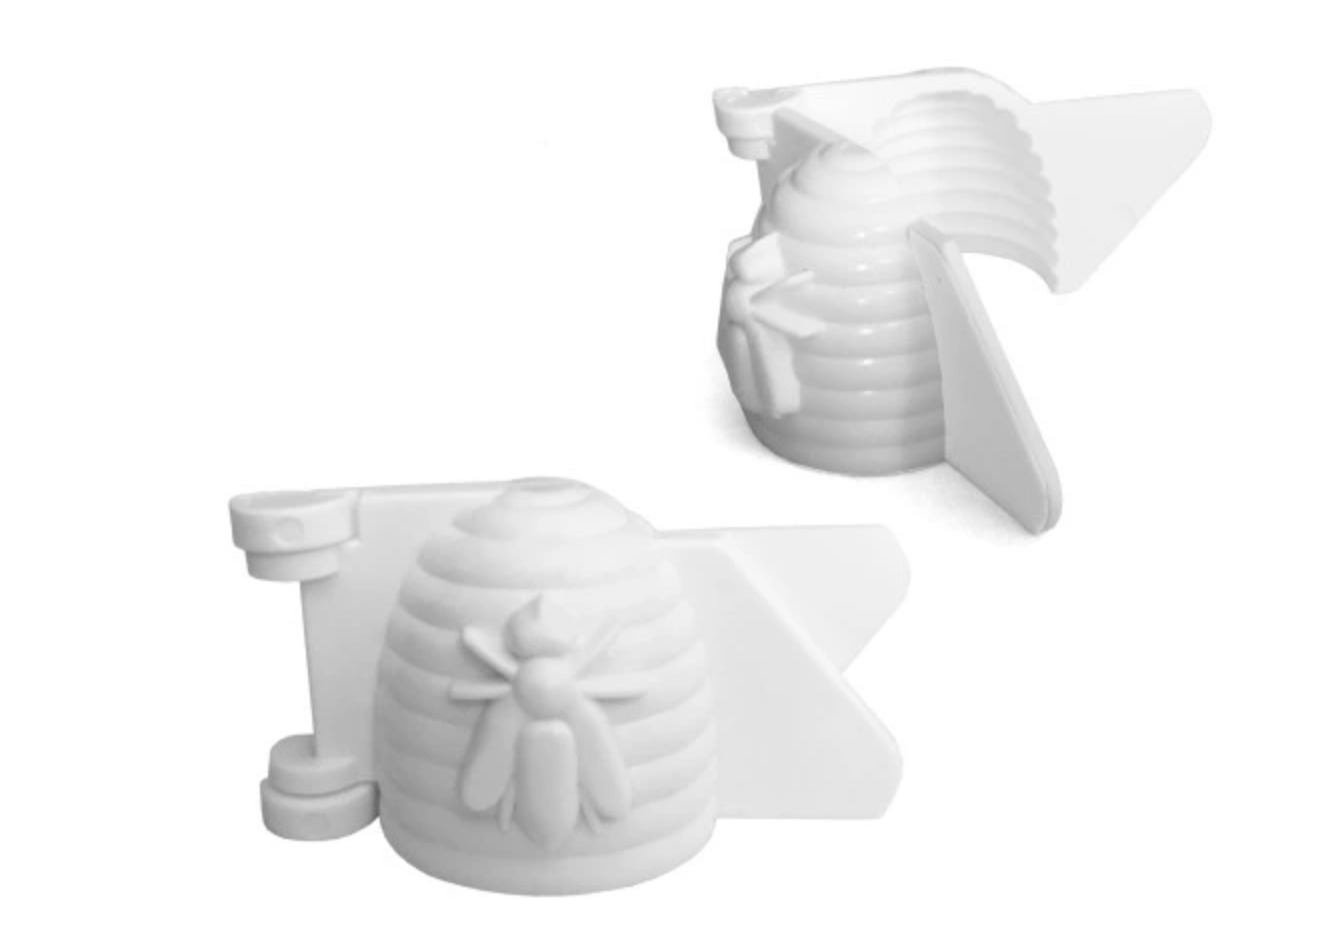 Sample photo of 'hive' moulds / screenshot / allegro